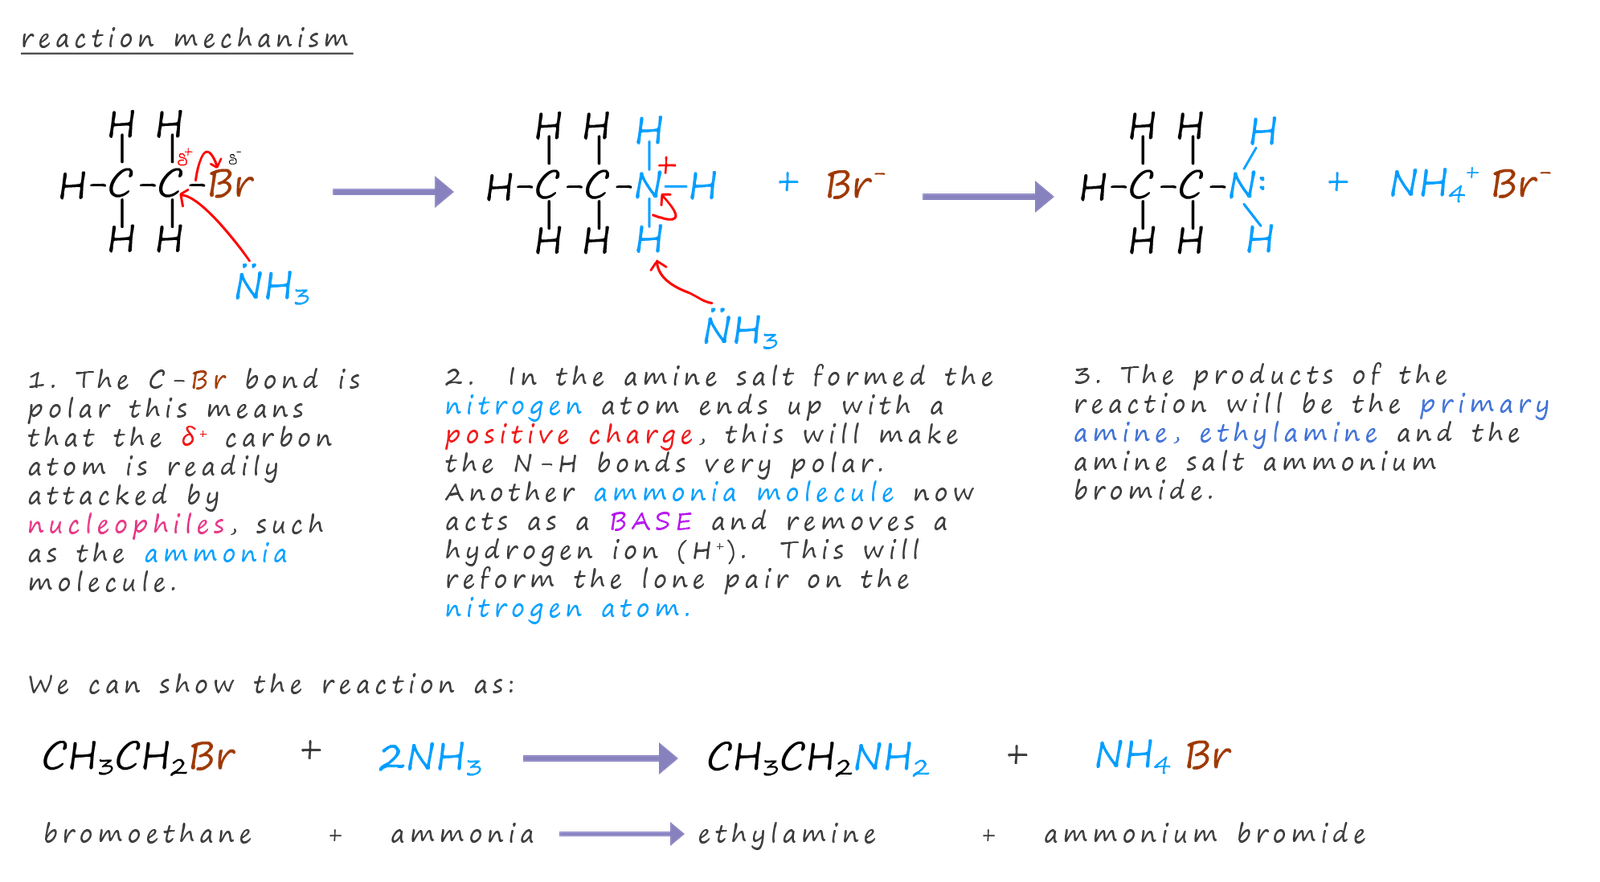 reaction mechanism and equations for the preparation of ethylamine from bromoethane using ammonia